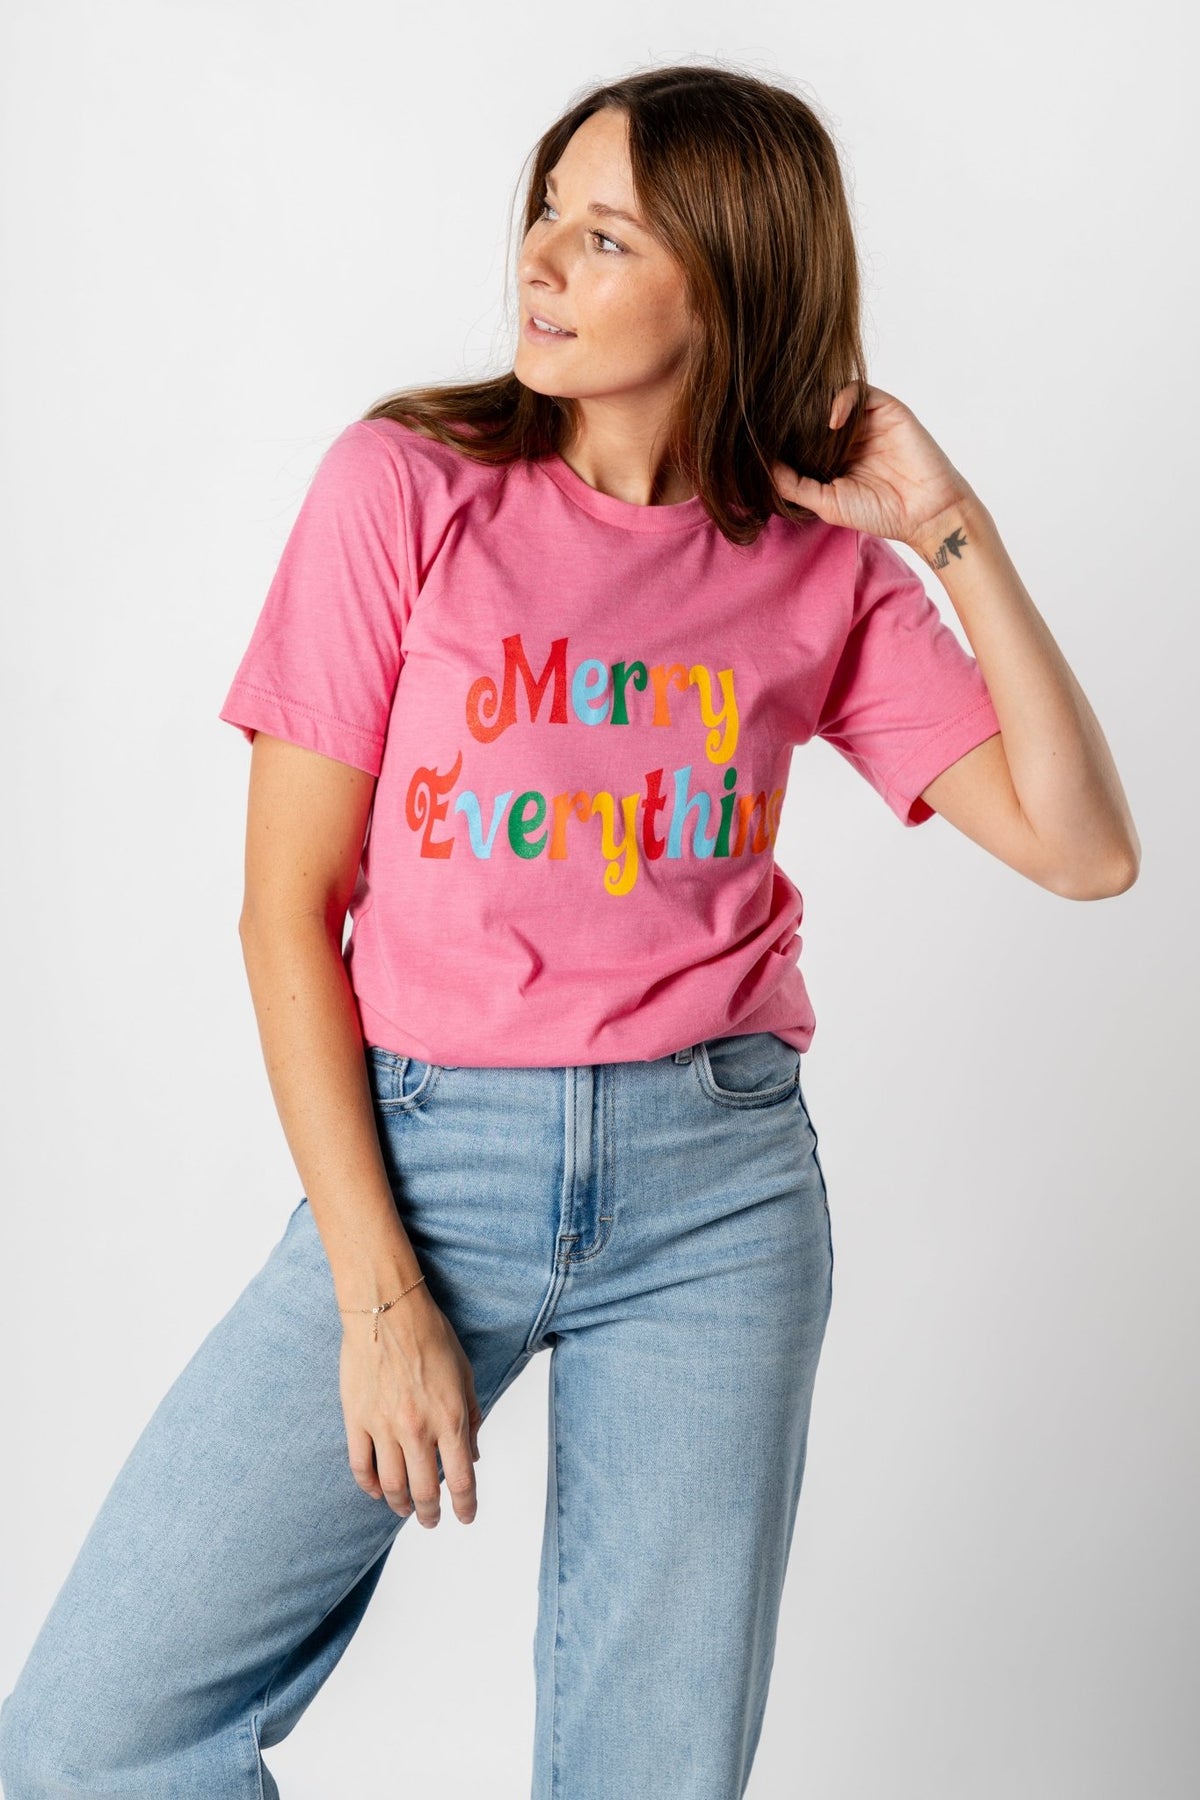 Merry everything t-shirt bright pink - Trendy Holiday Apparel at Lush Fashion Lounge Boutique in Oklahoma City